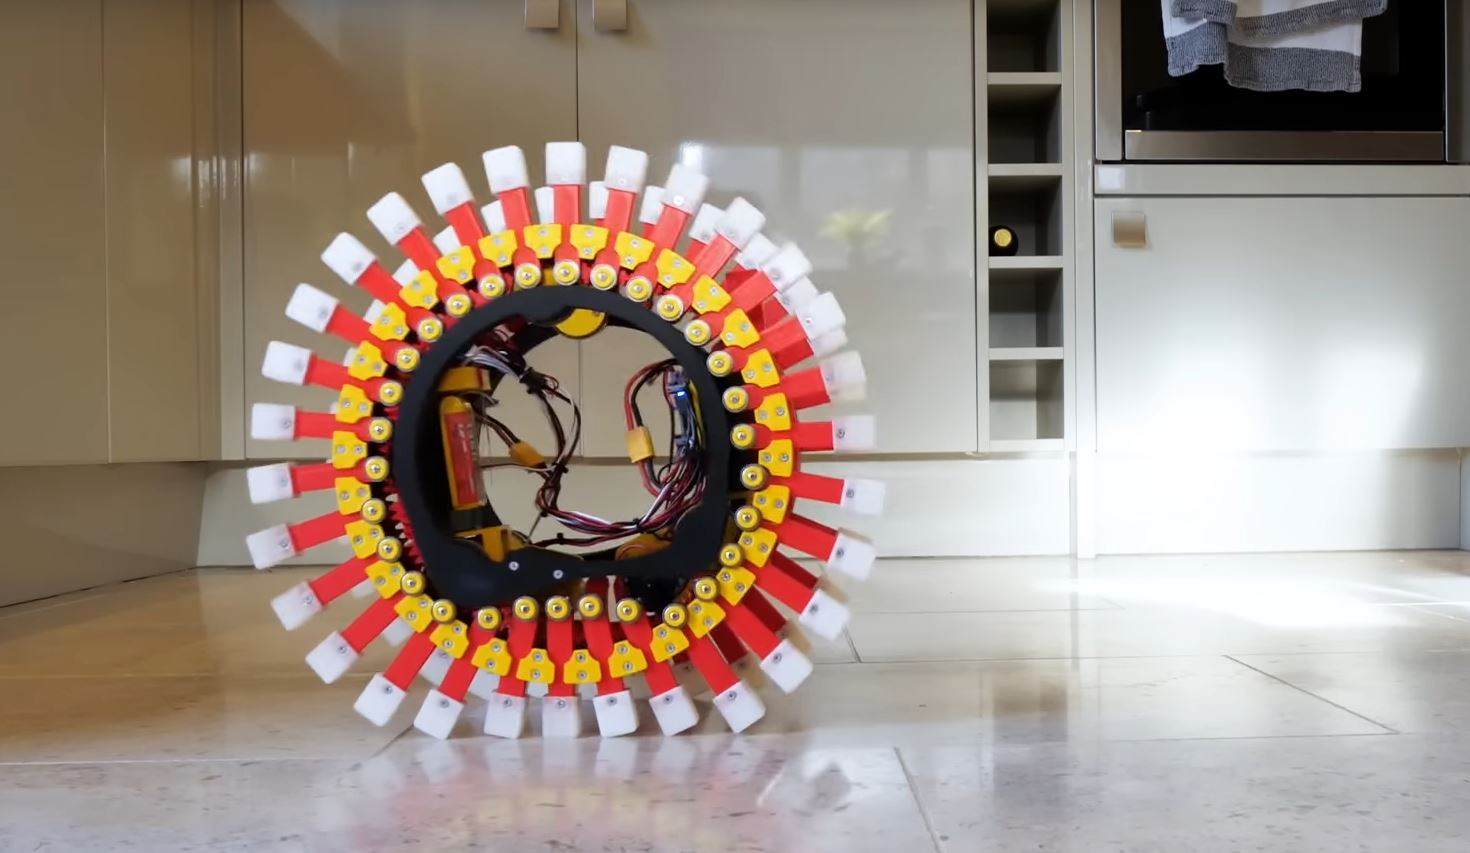 This Mechanically Stable Robot Wheel Is Just Plain Fun To Watch